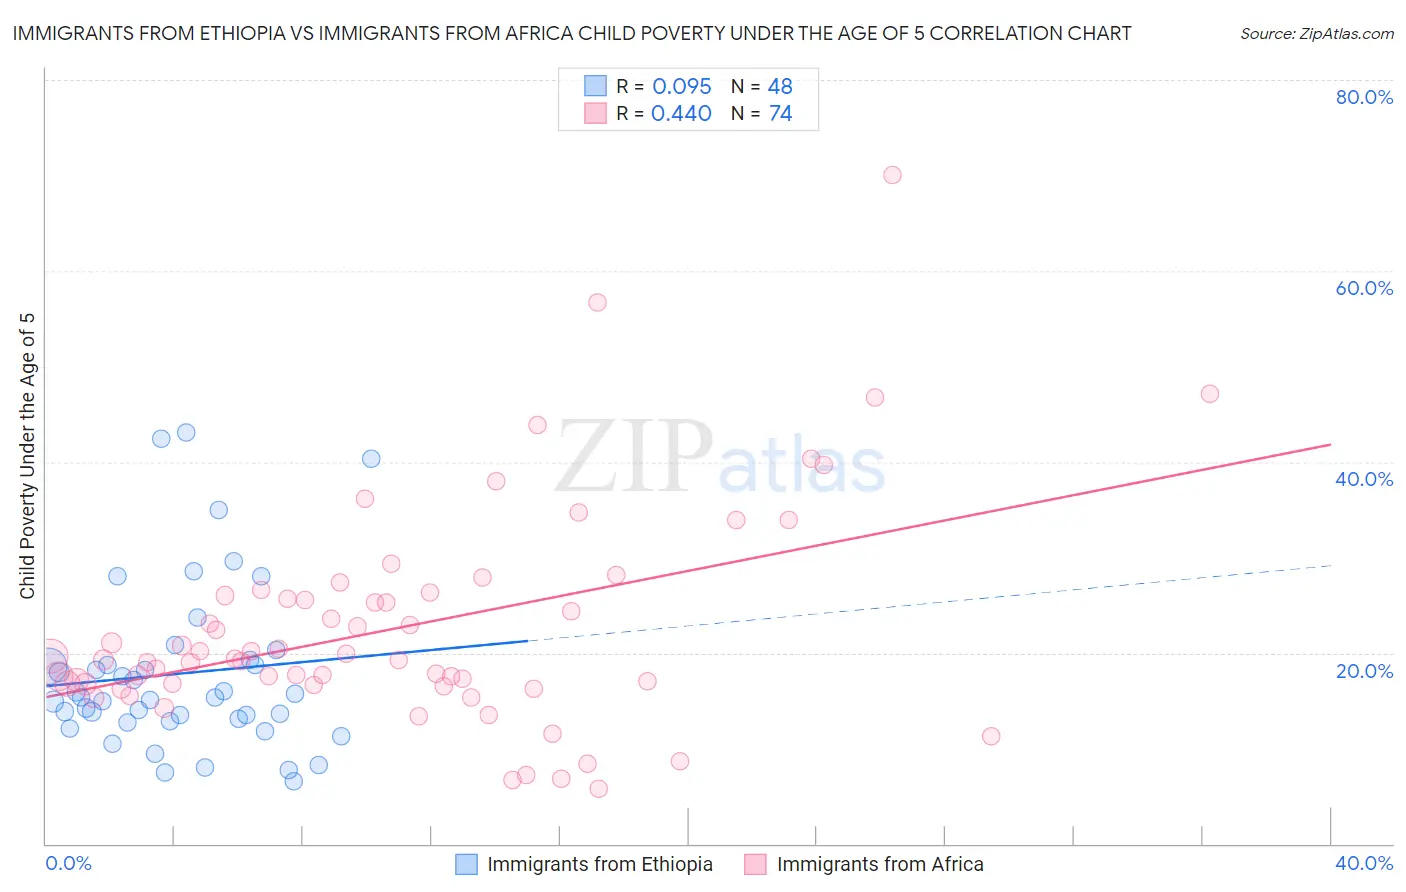 Immigrants from Ethiopia vs Immigrants from Africa Child Poverty Under the Age of 5